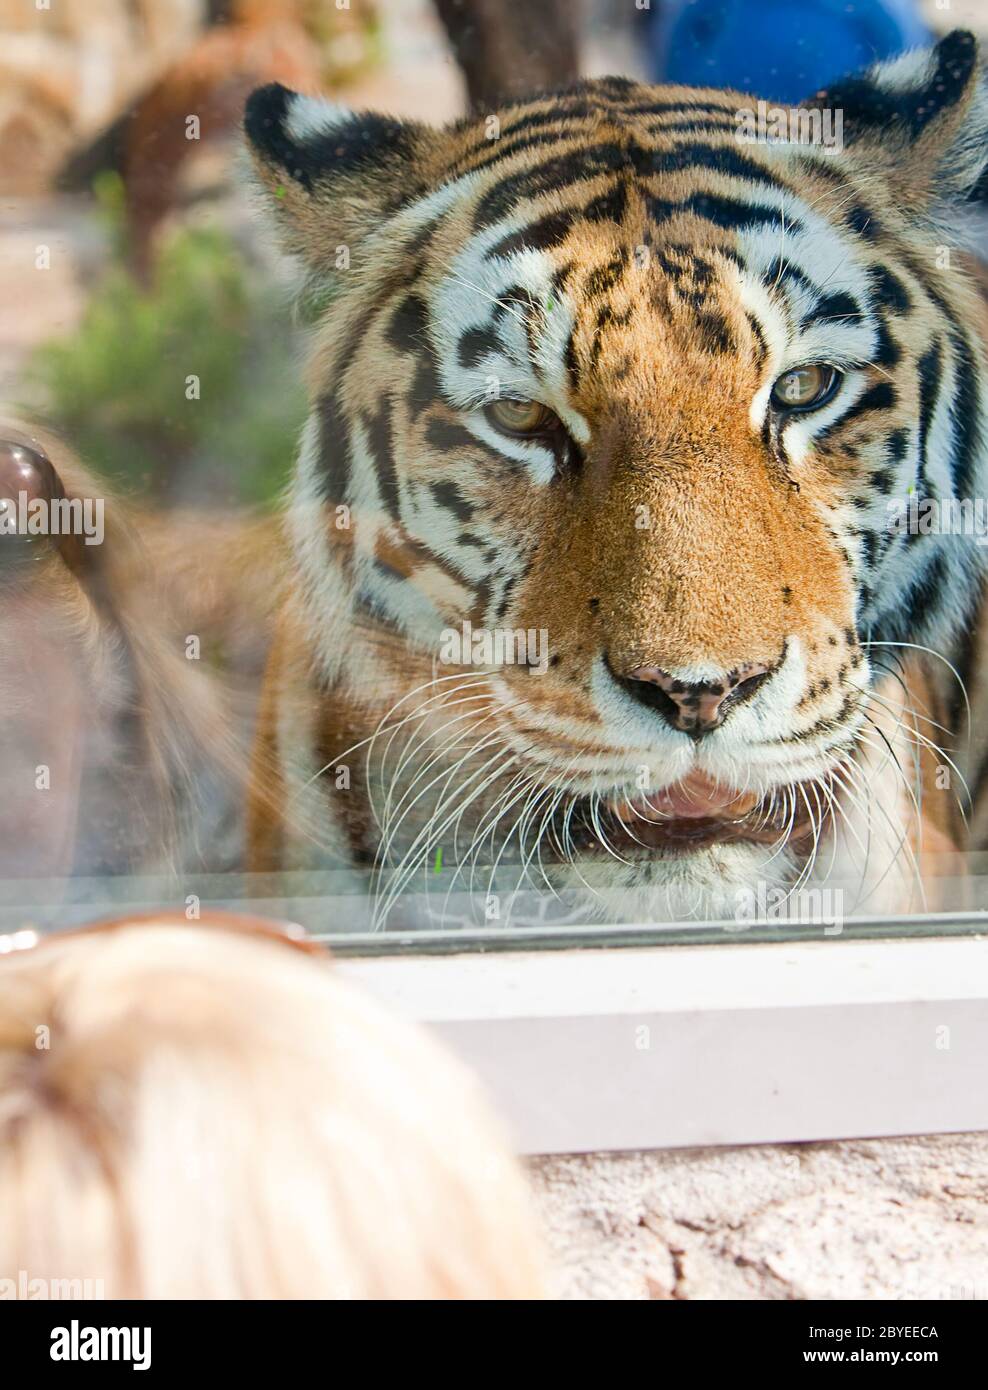 The tiger looks at visitors of park through glass Stock Photo